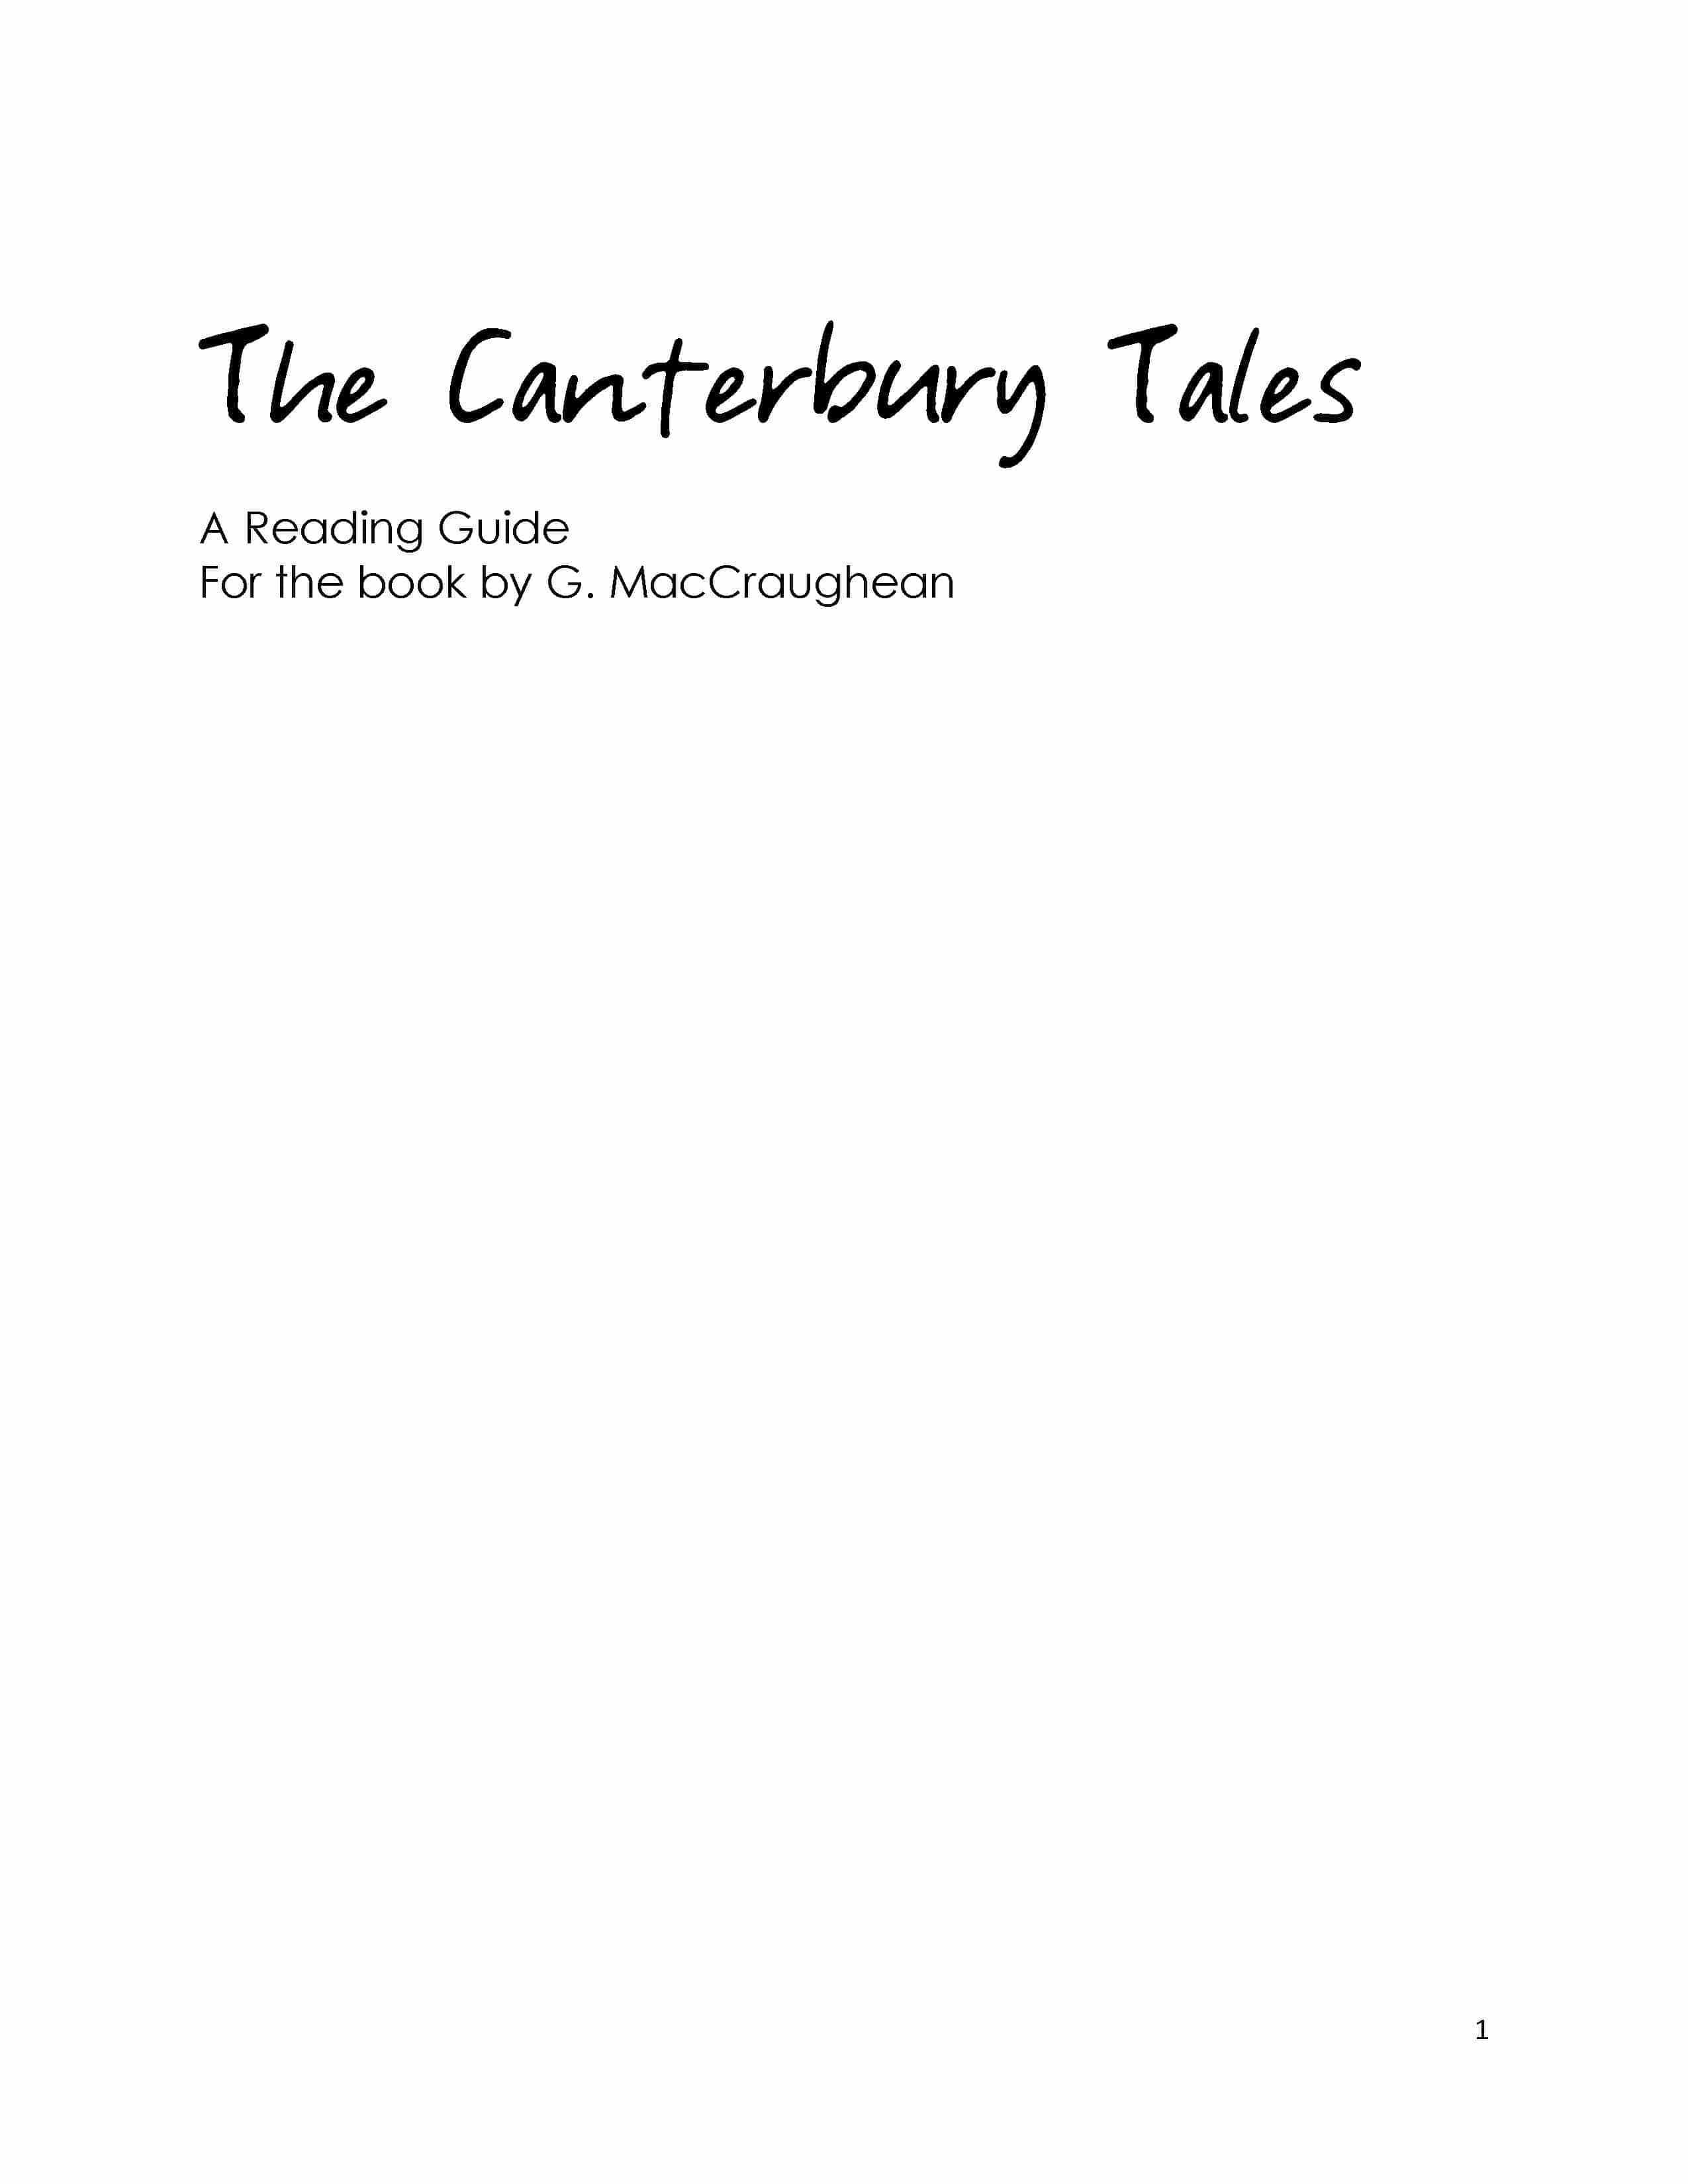 The Canterbury Tales (Retold) - Reading Guide (Download)